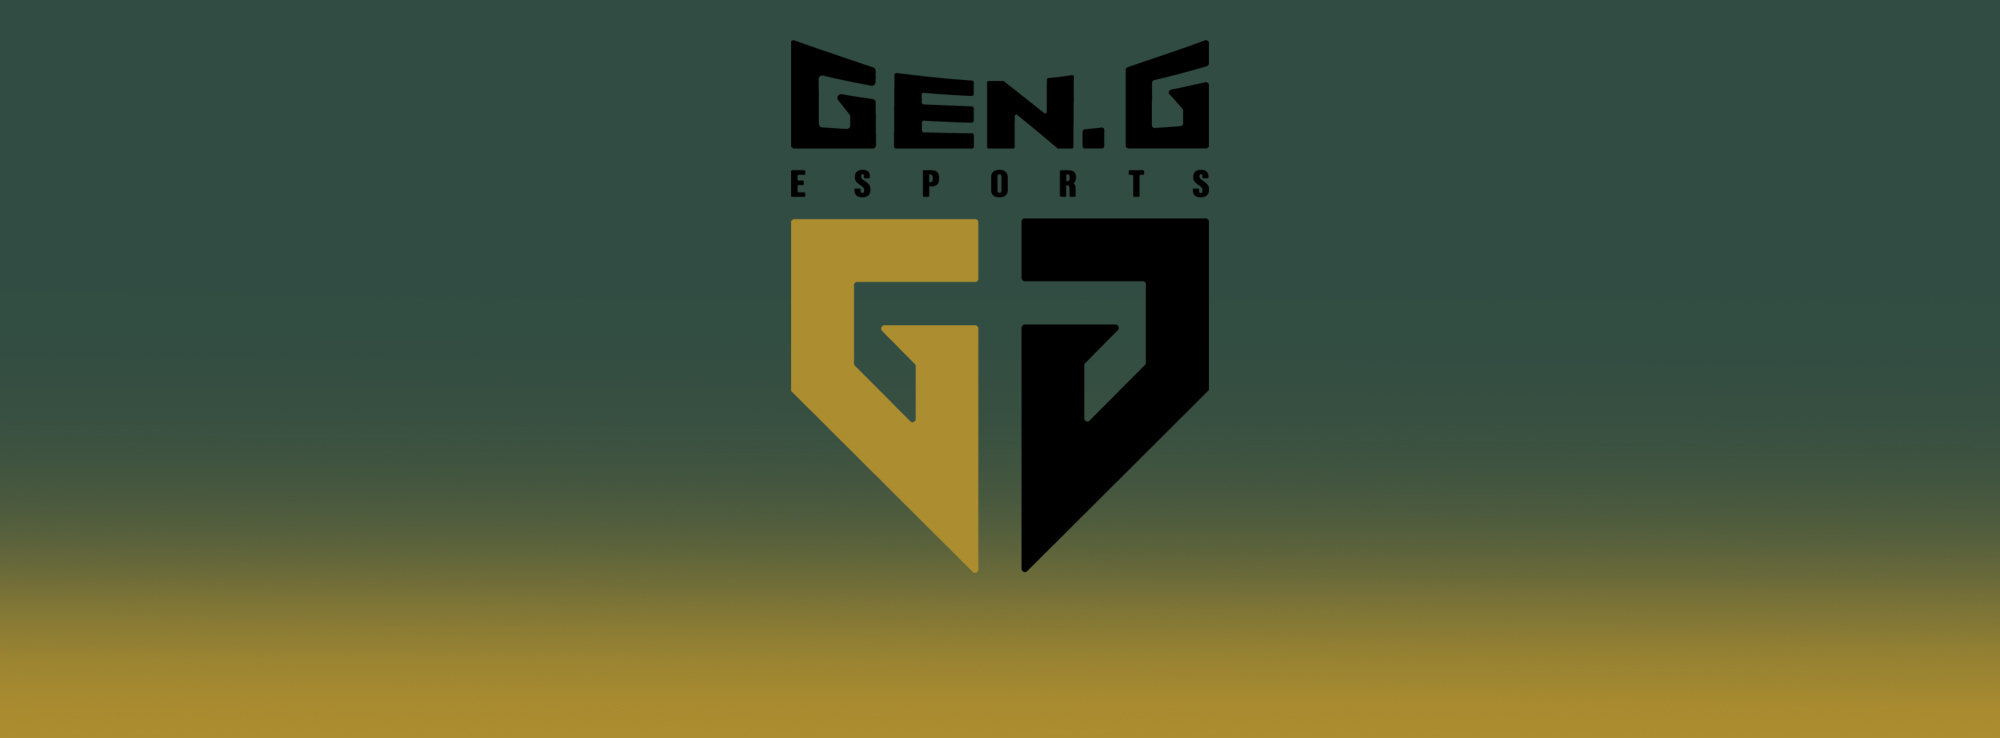 CS:GO – Damian ‘daps’ Steele Announces His Leave From Gen. G Once They Find A New Fifth